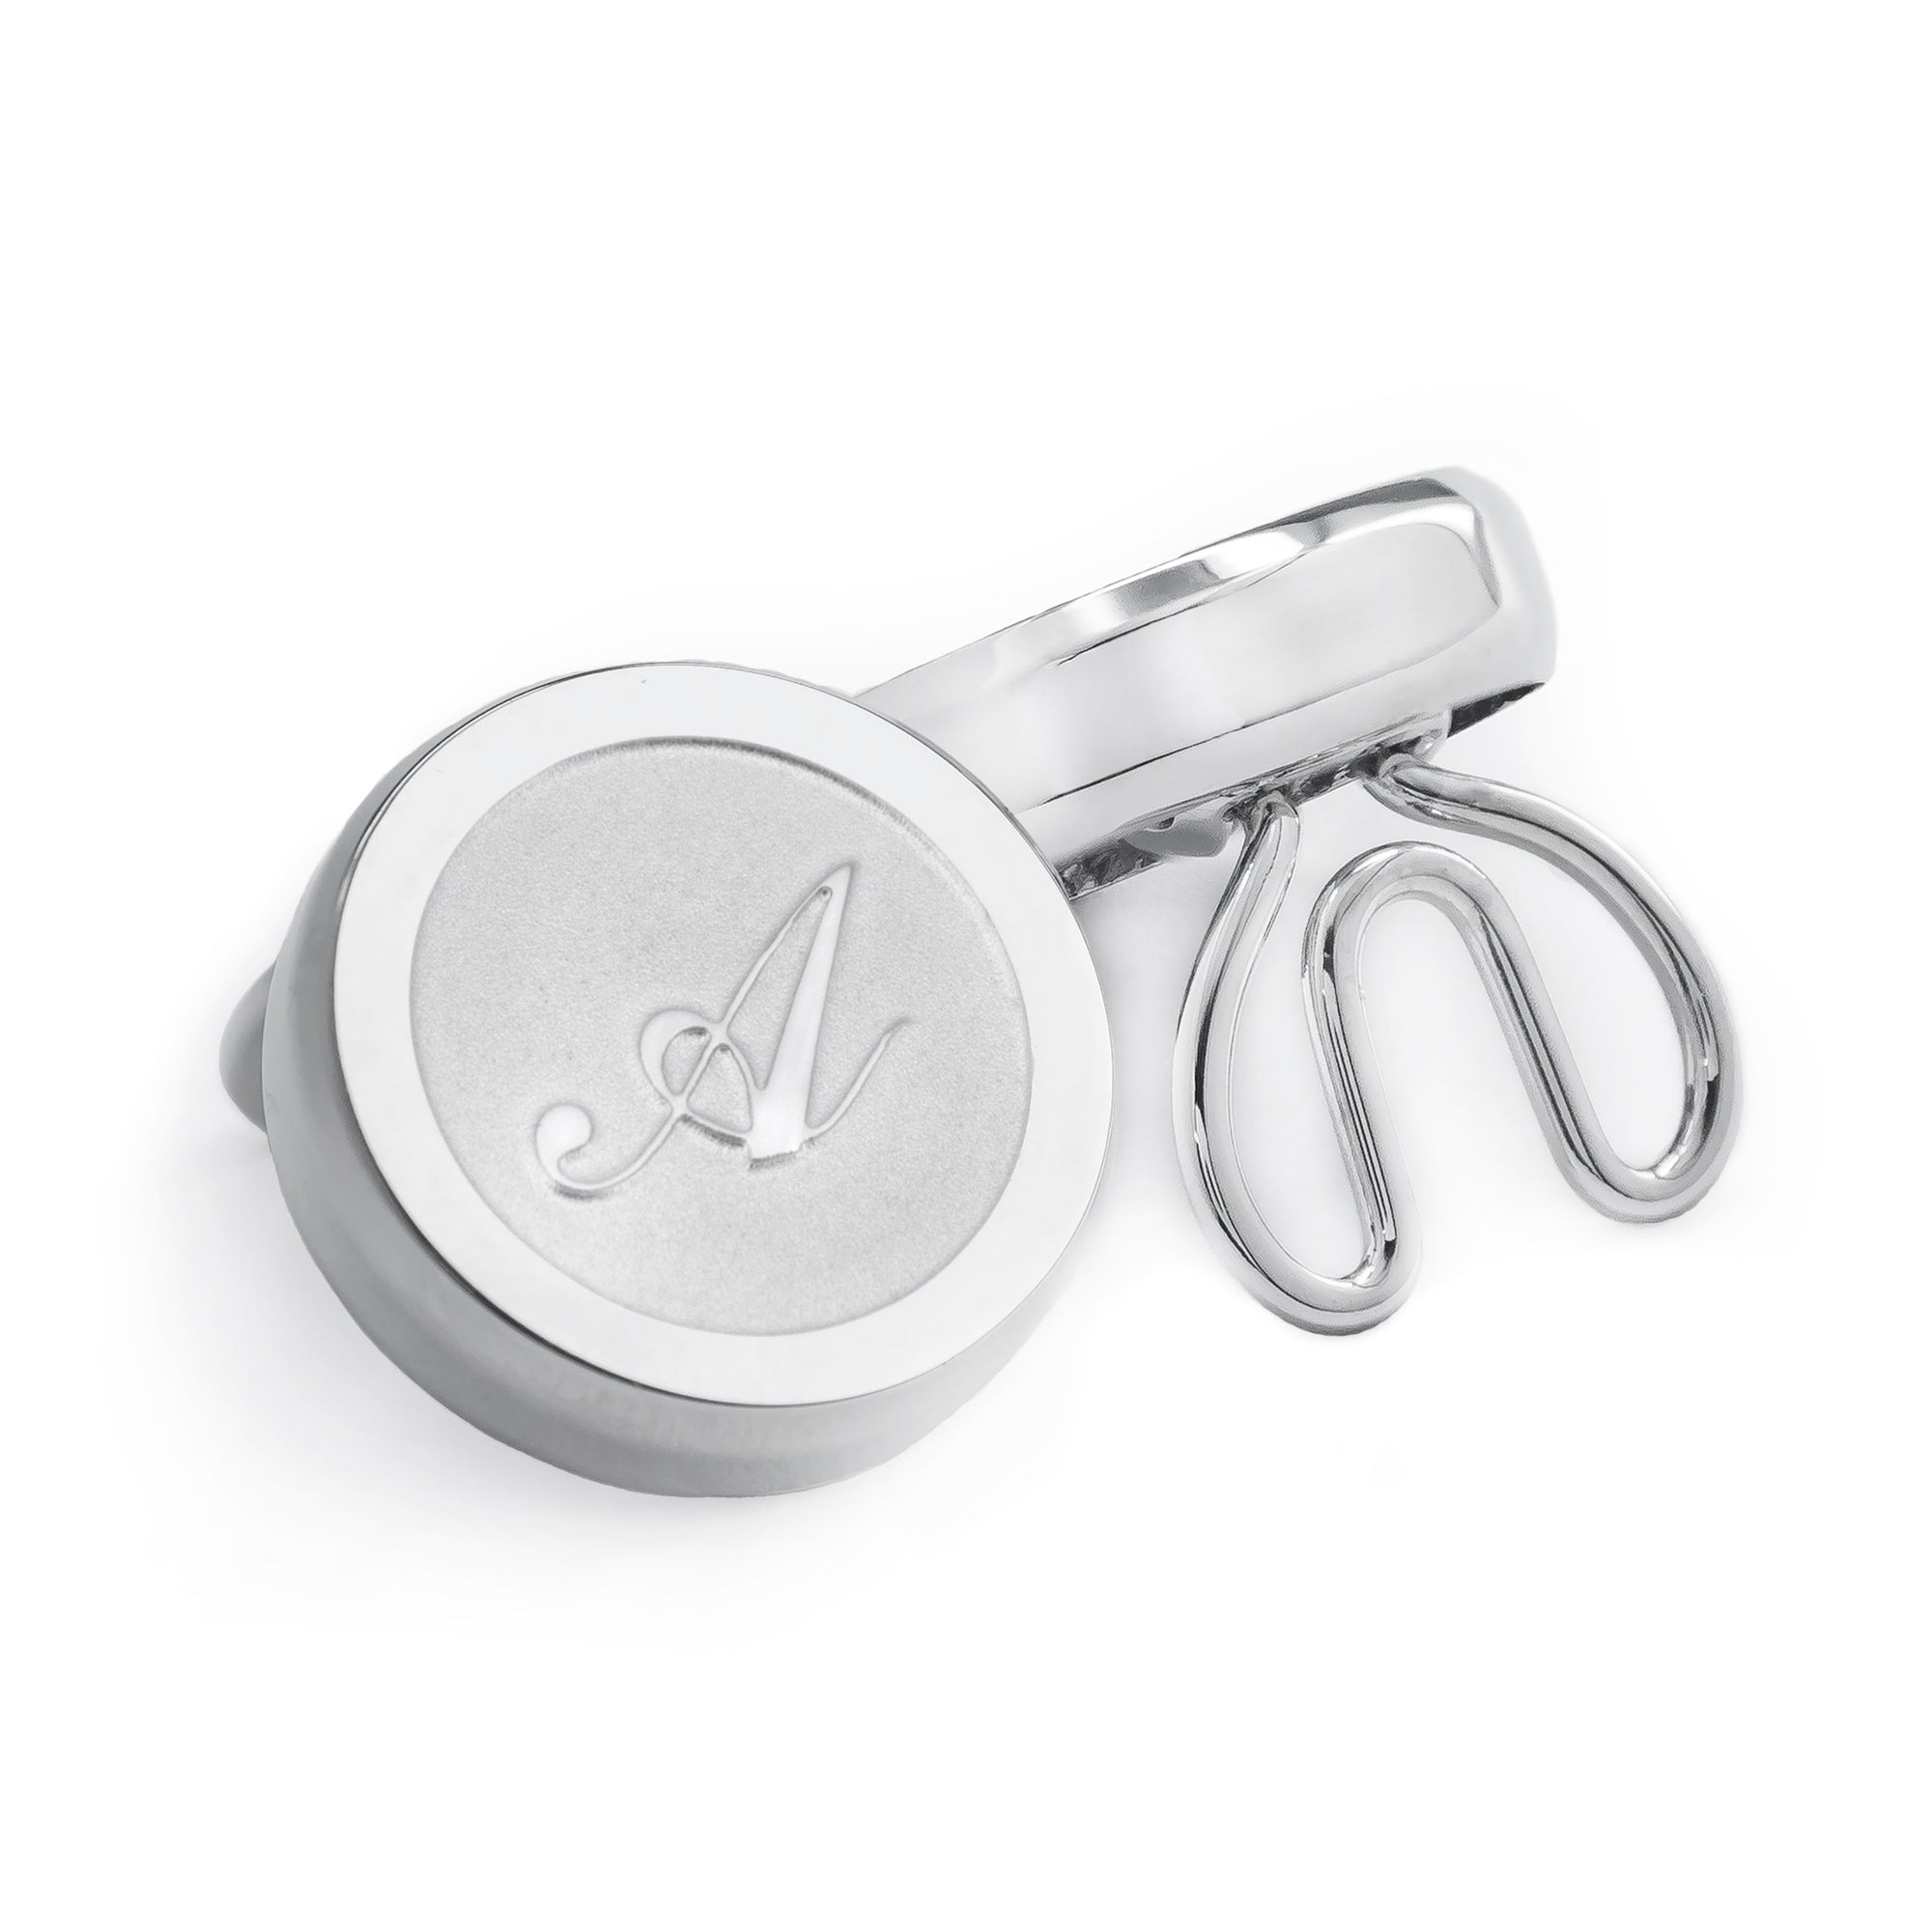 Monogram Etched Silver Clip-on Button Covers-Button Covers-A.Azthom-Cufflinks.com.sg